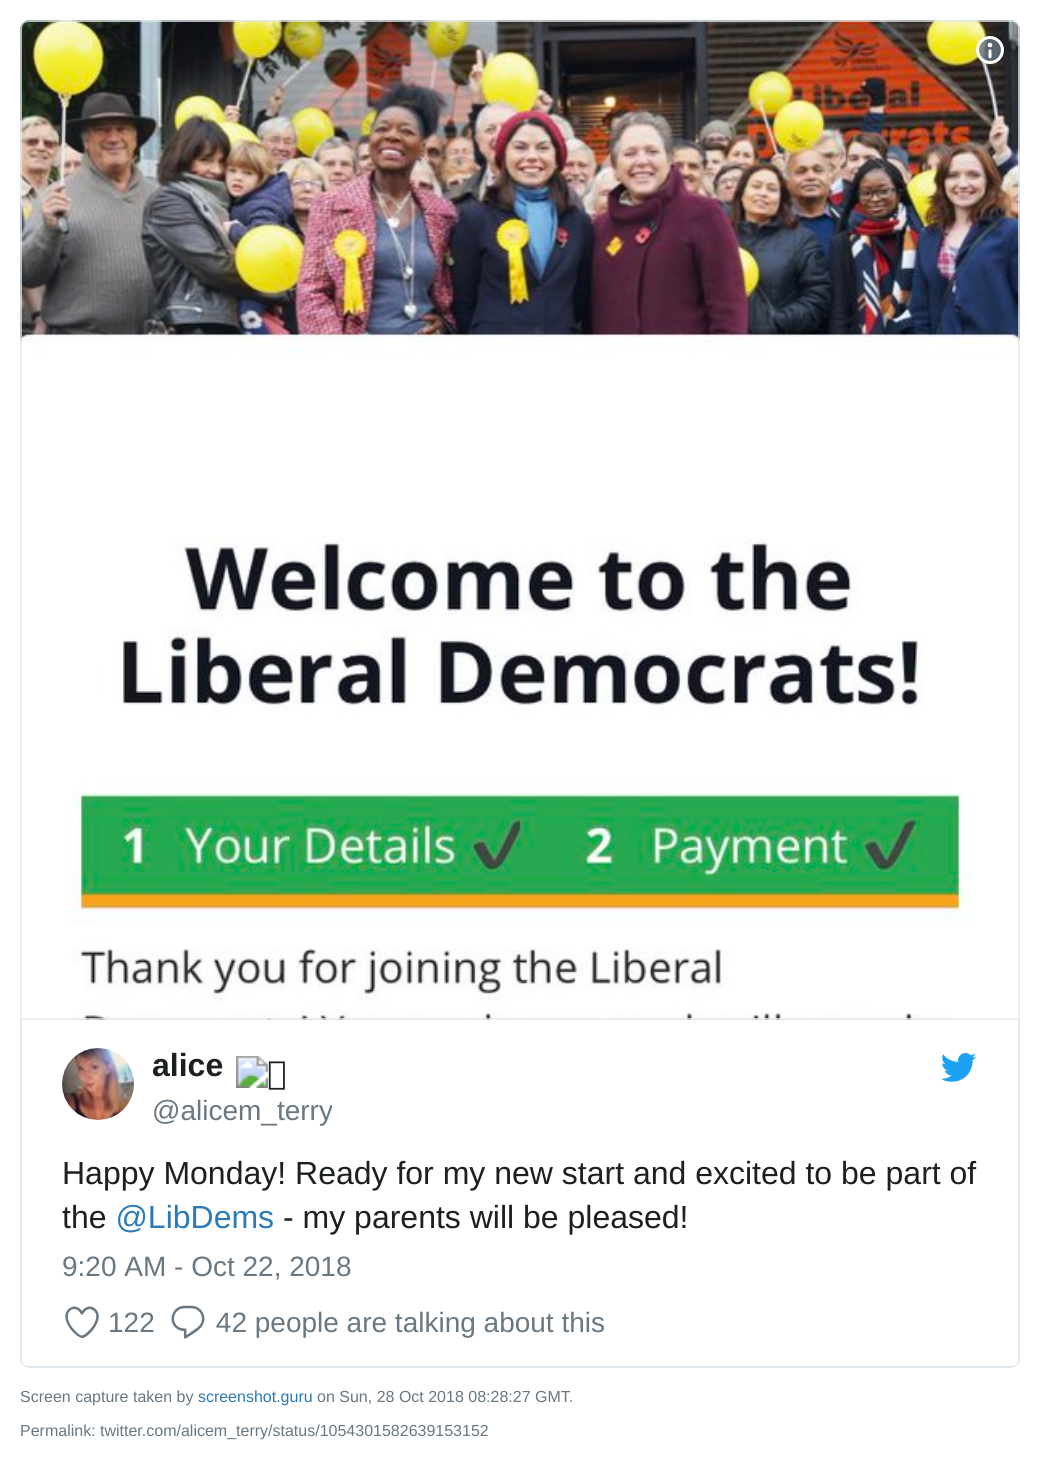 Alice Terry joins Lib Dems